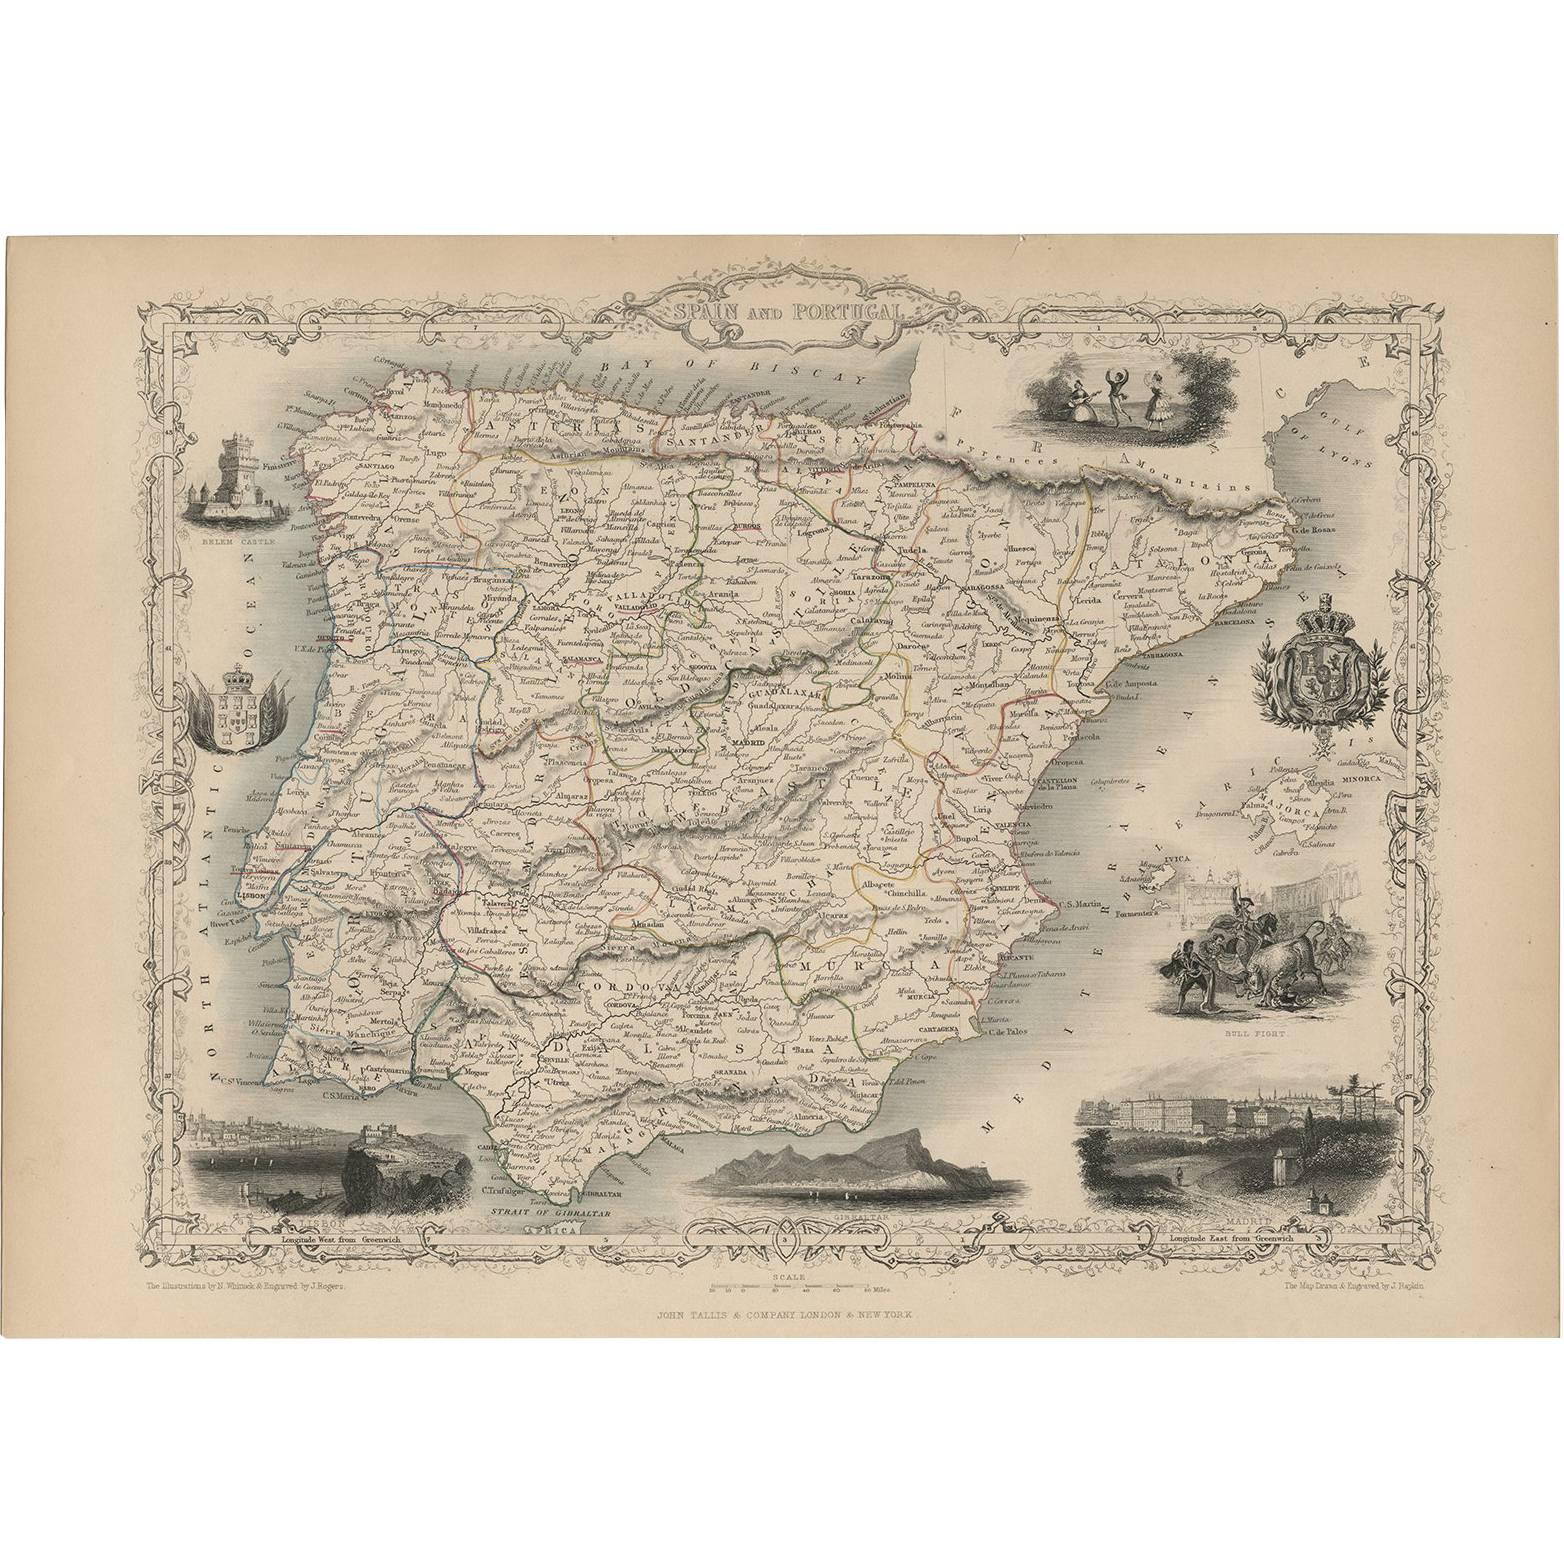 Antique Map of Spain and Portugal by J. Tallis, circa 1851